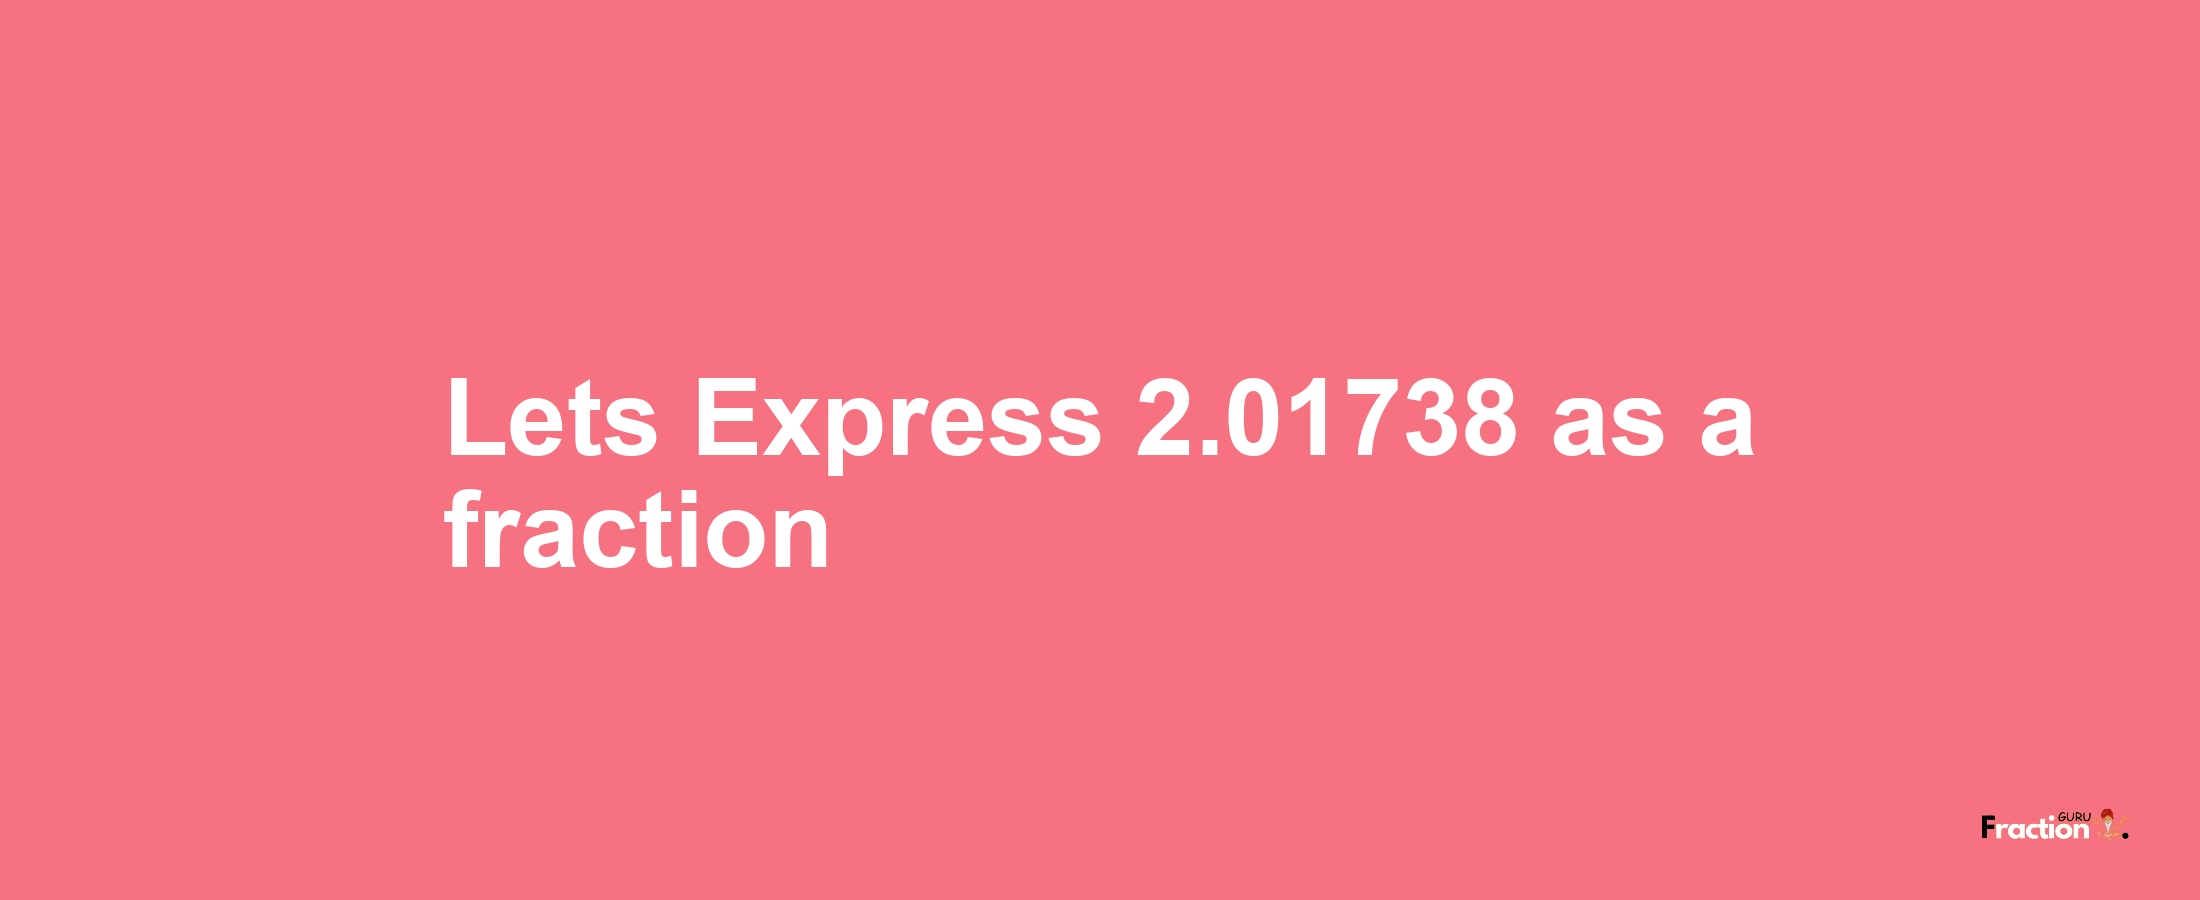 Lets Express 2.01738 as afraction